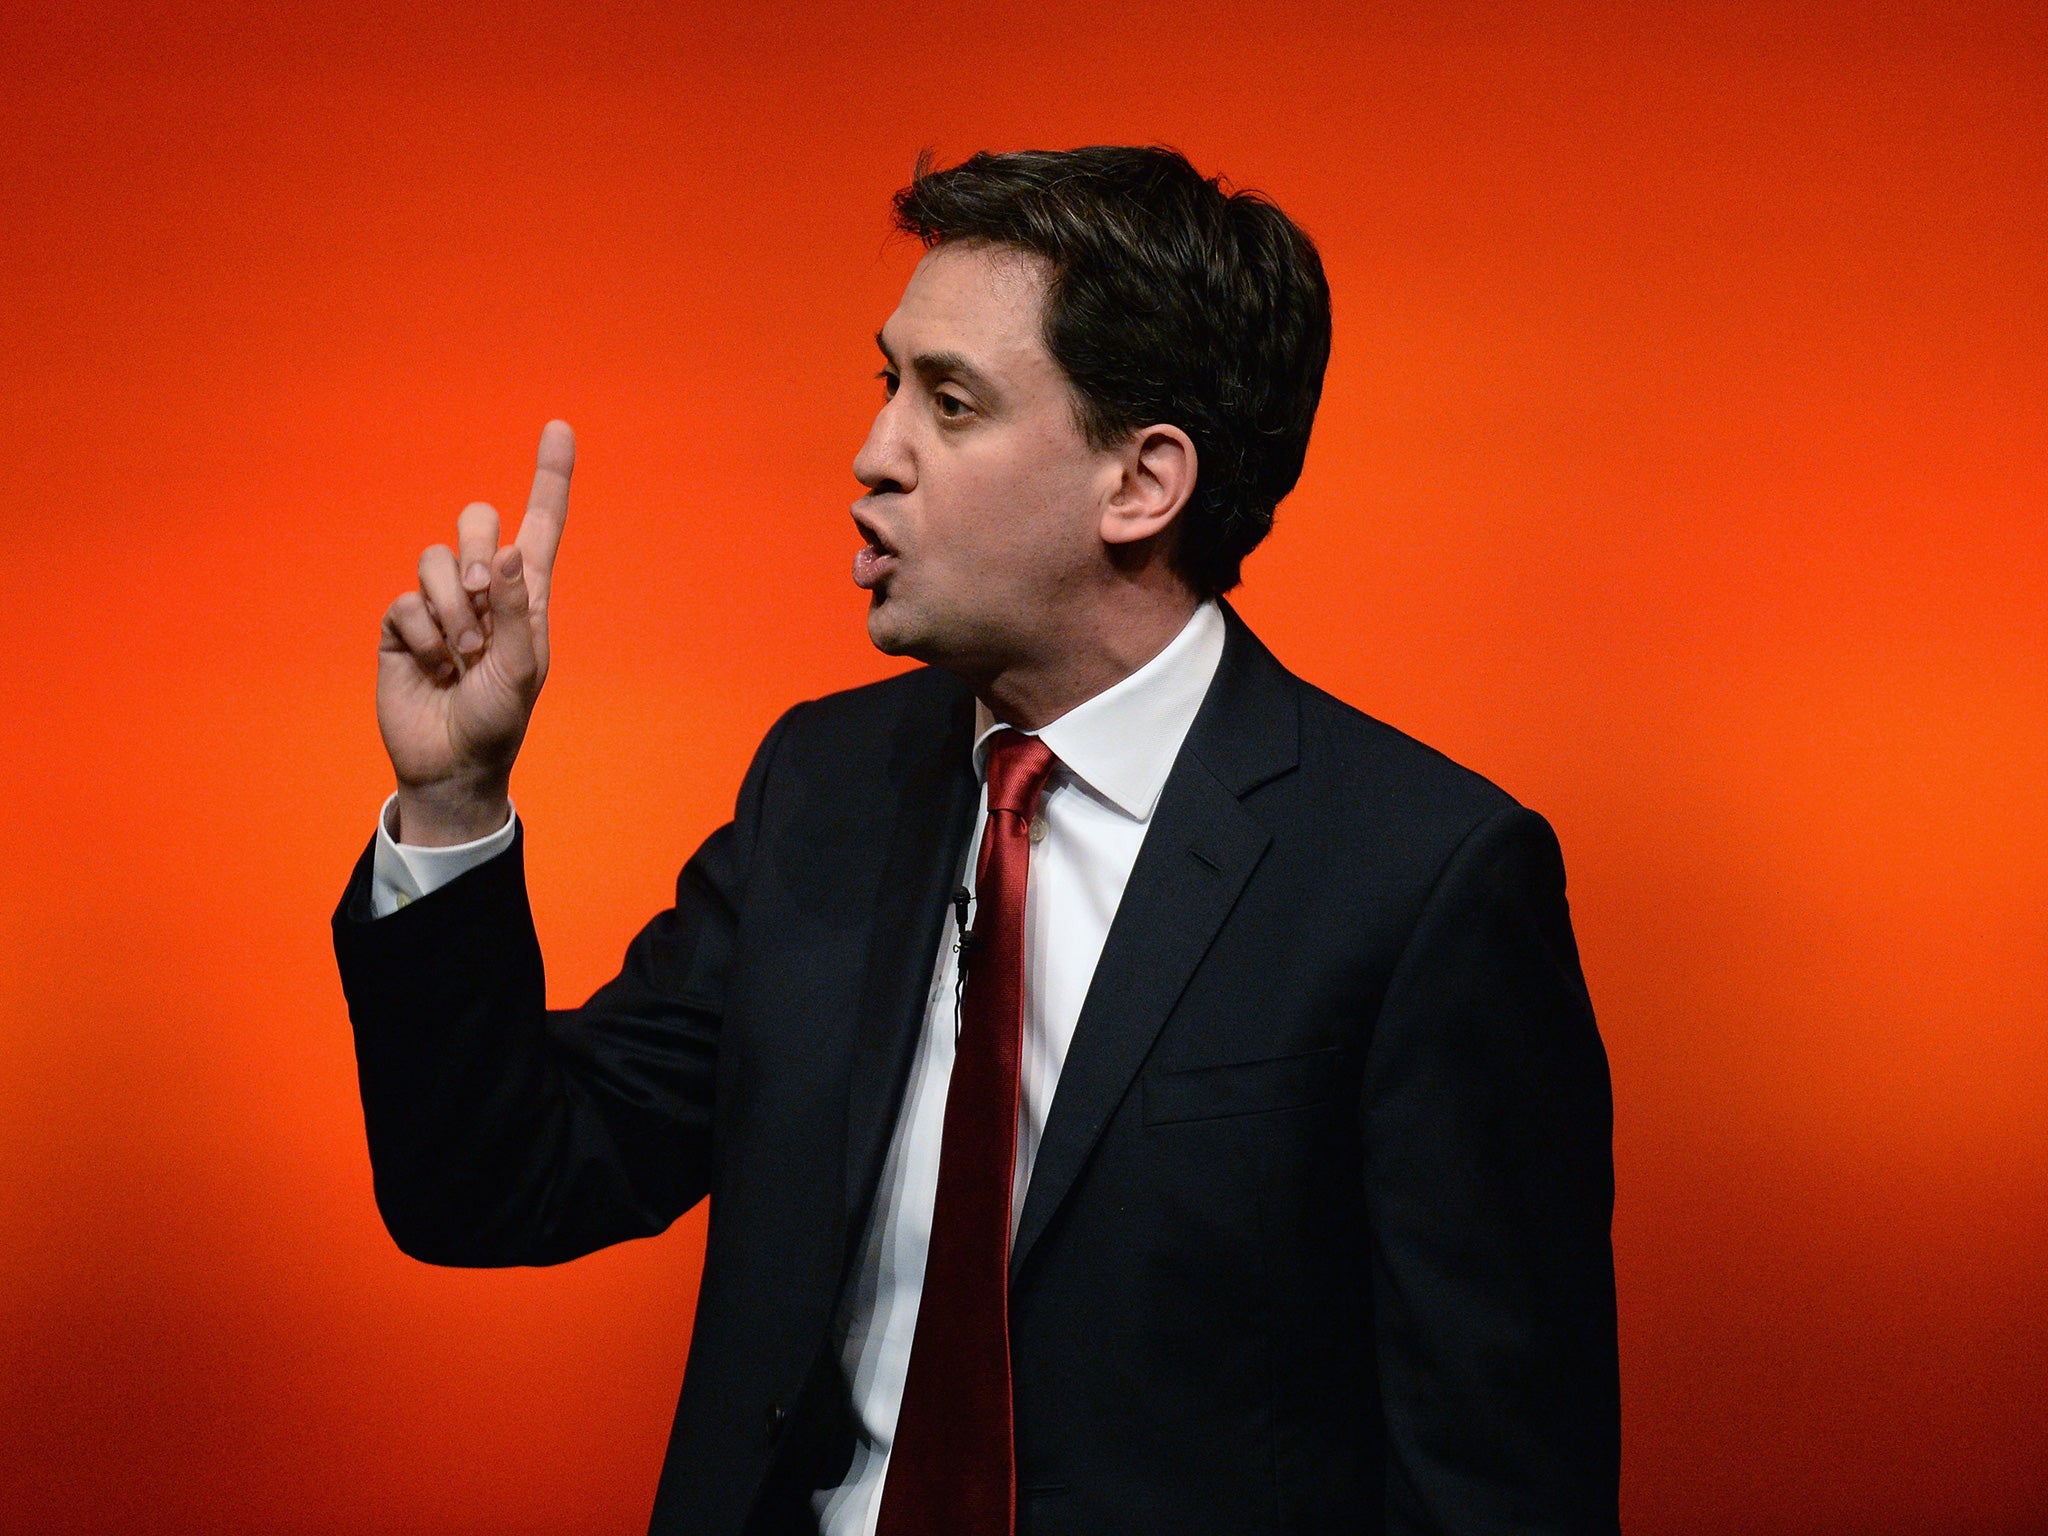 Ed Miliband hires a leadership consultant